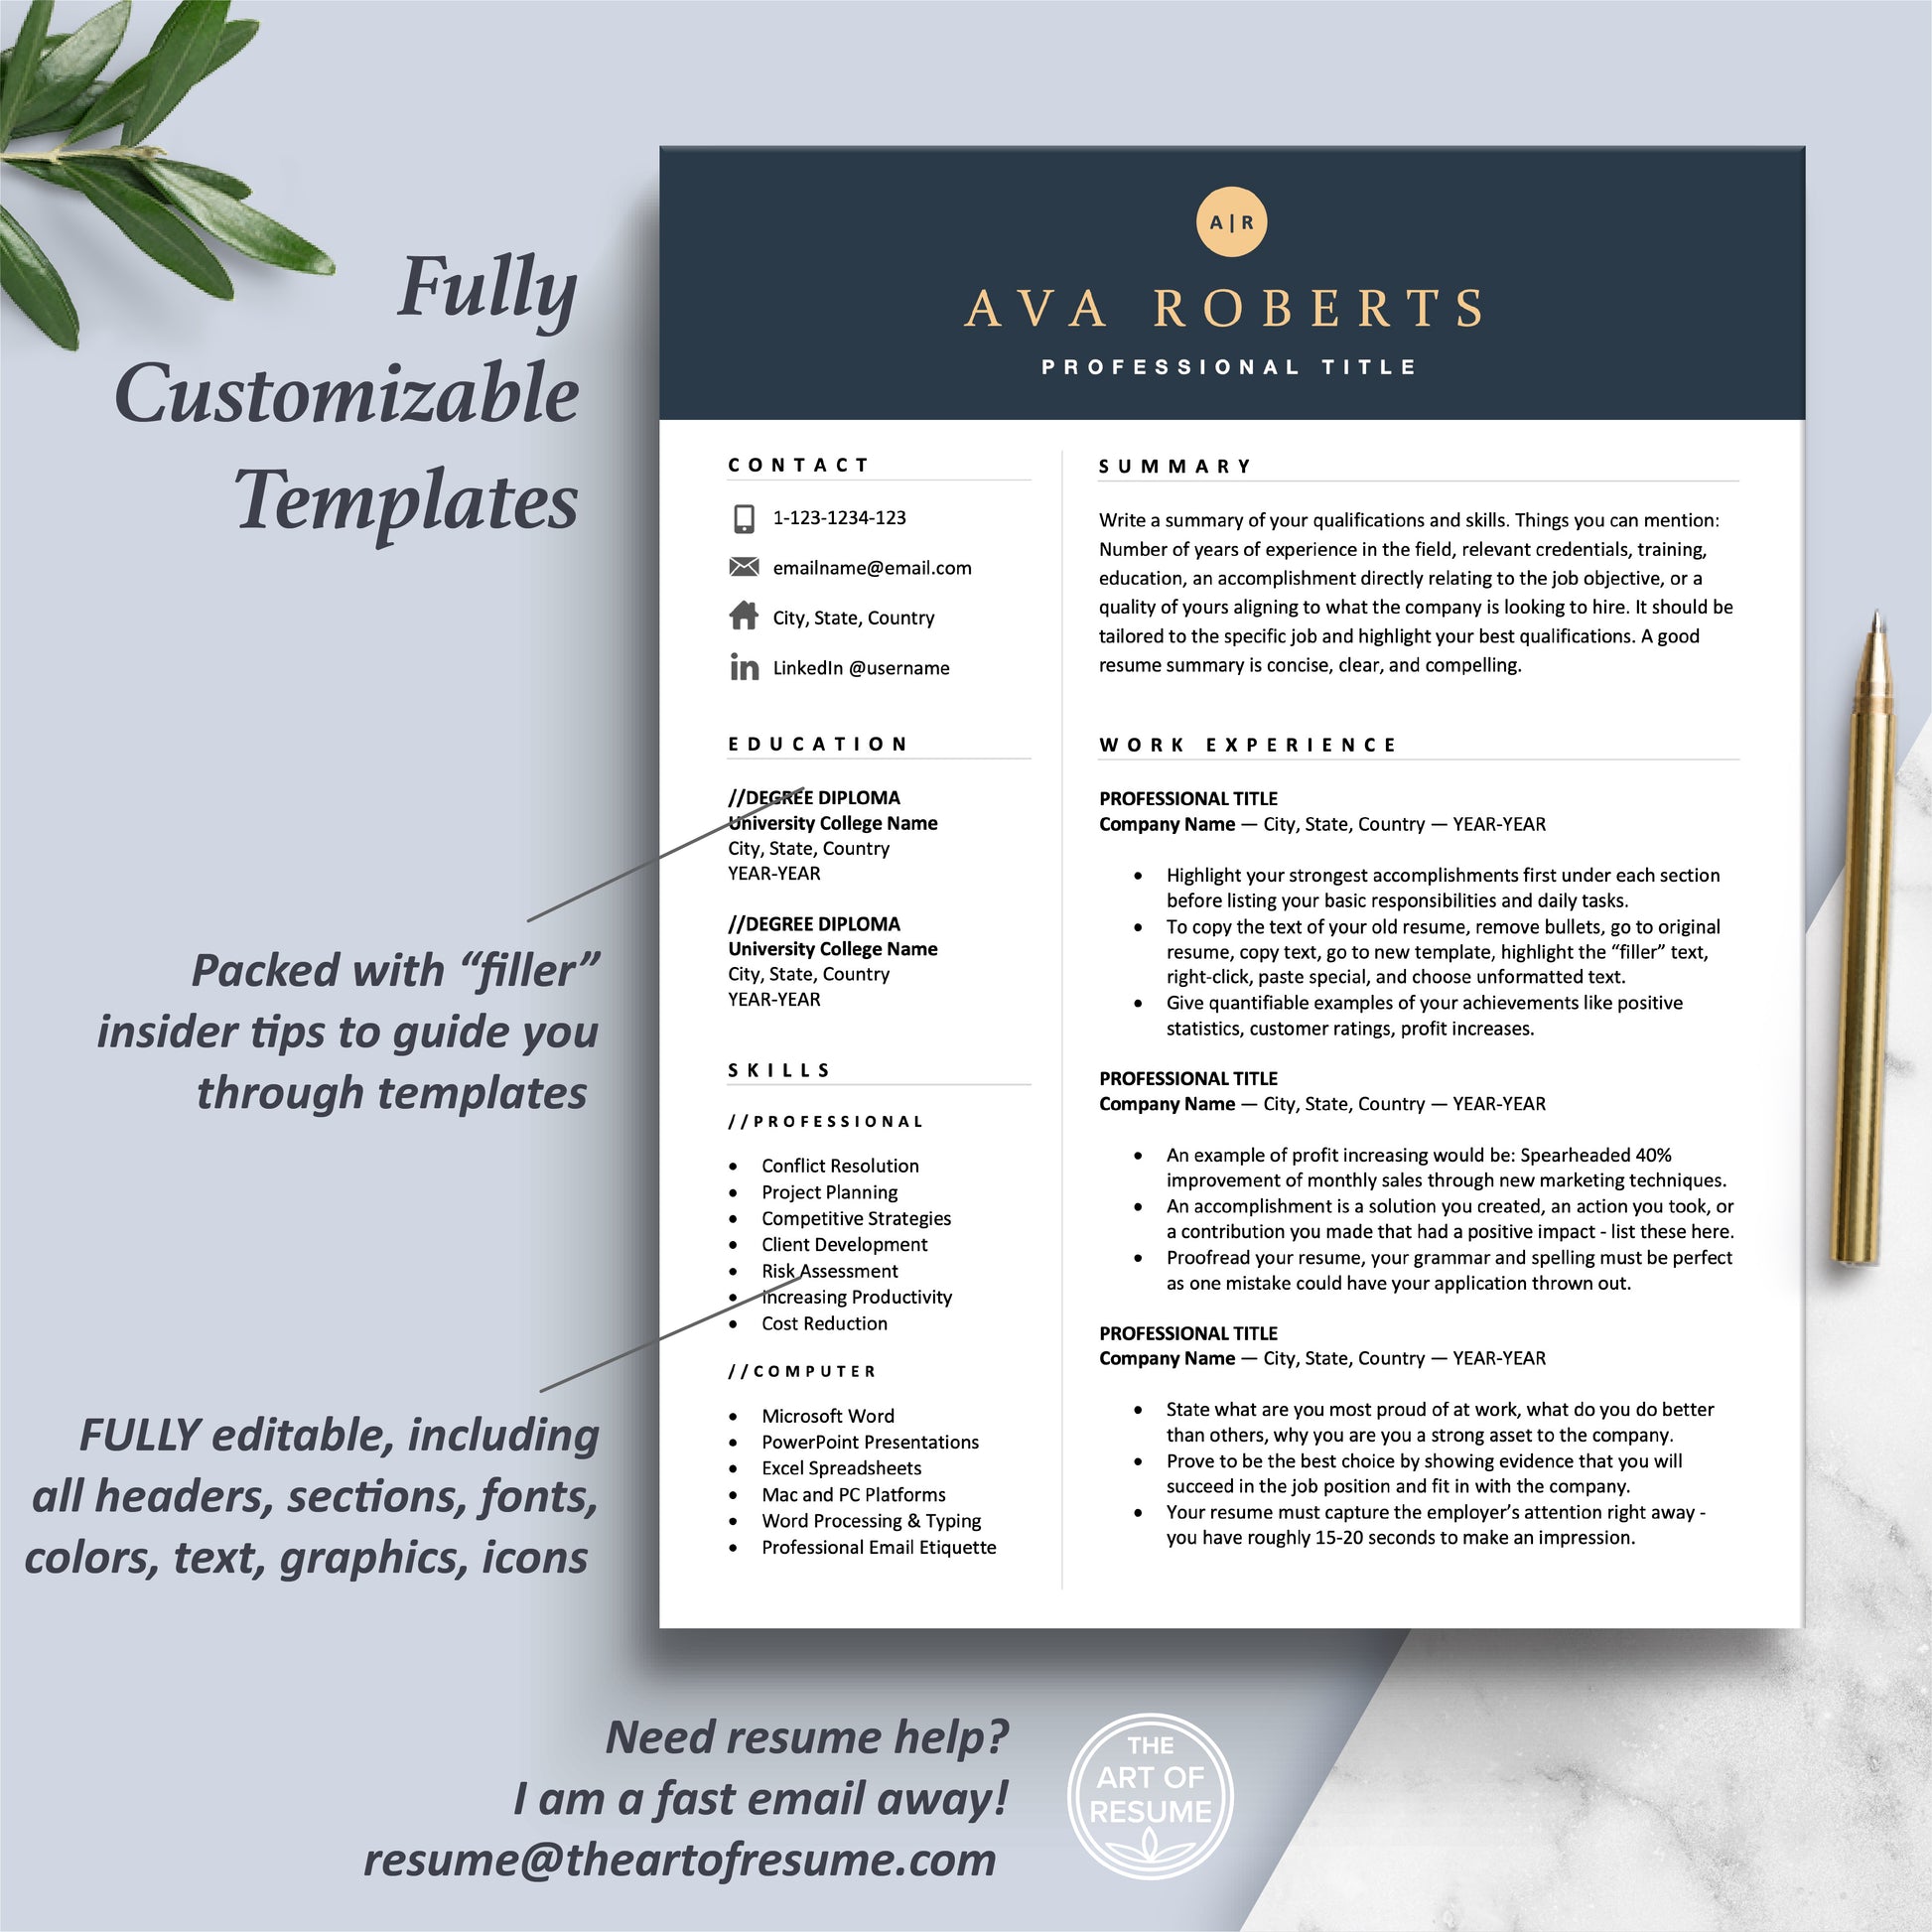 The Art of Resume Templates | One-Page Professional Resume CV Design Template Maker | Curriculum Vitae